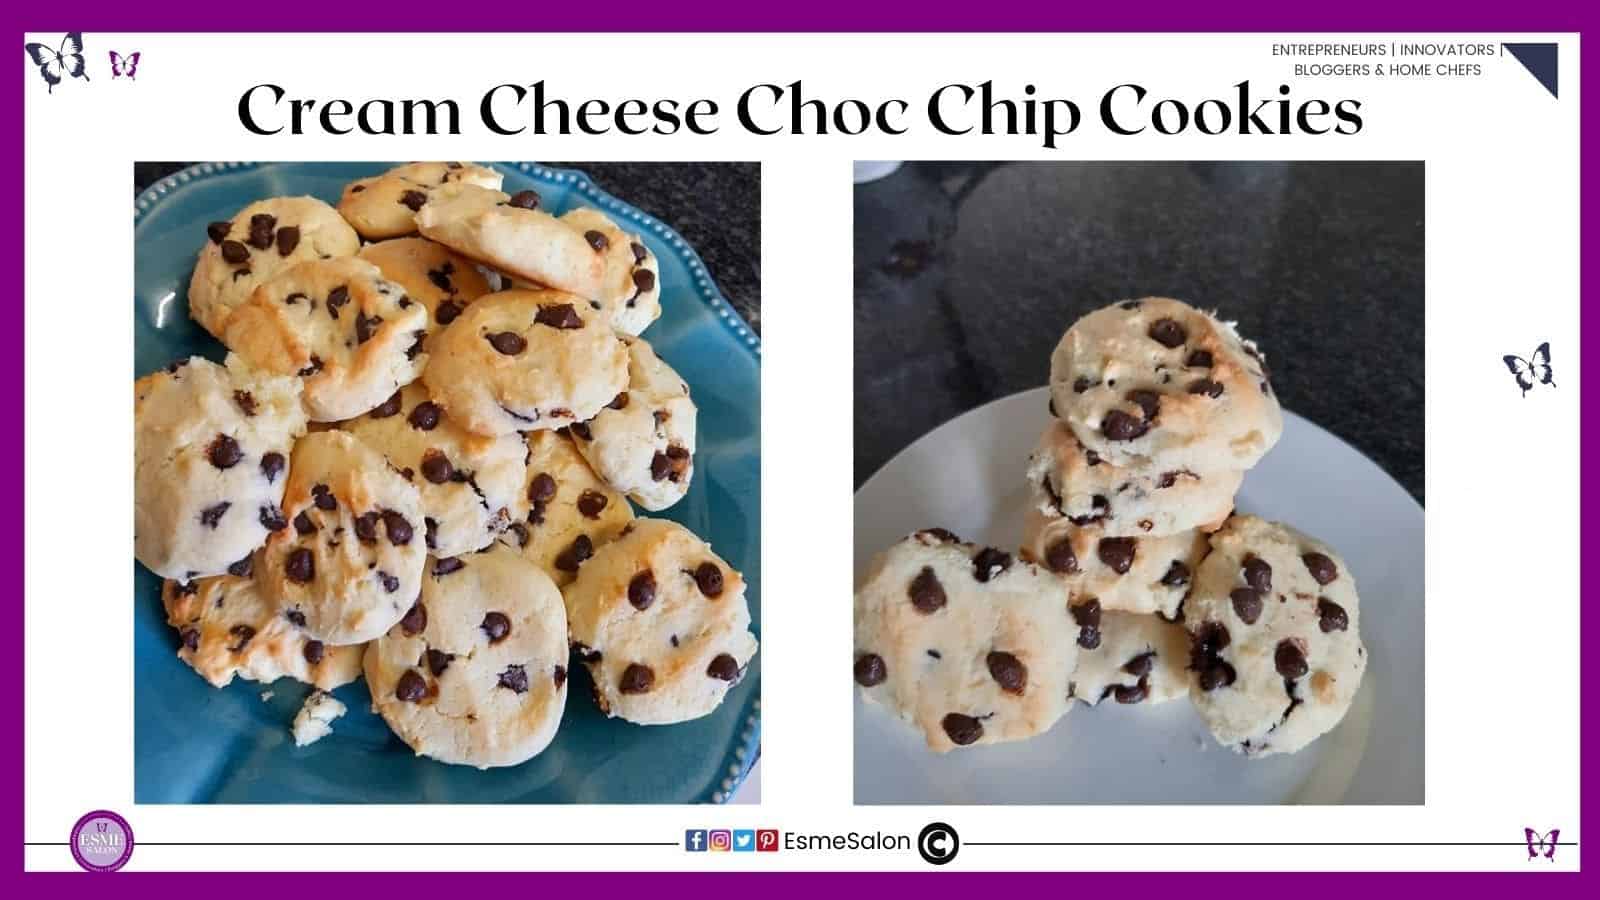 an image of a blue and white plate filled with Cream Cheese Choc Chip Cookies